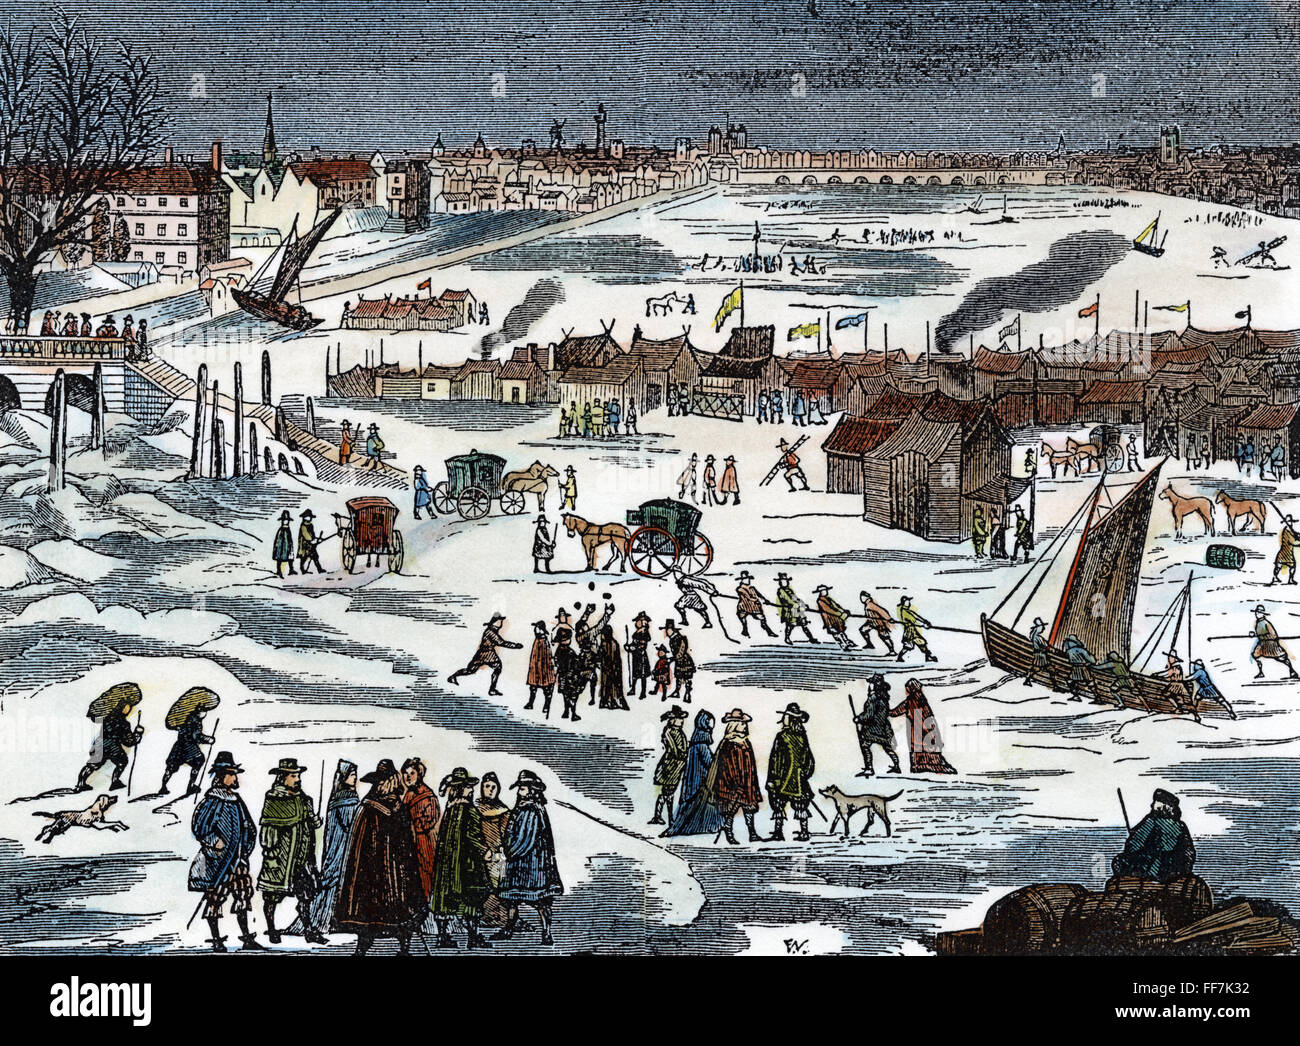 THAMES: FROST FAIR, 1684. /nThe Frost Fair on the frozen Thames River in England during the severe winter of 1683-84. Wood engraving, 19th century, after a contemporary woodcut. Stock Photo